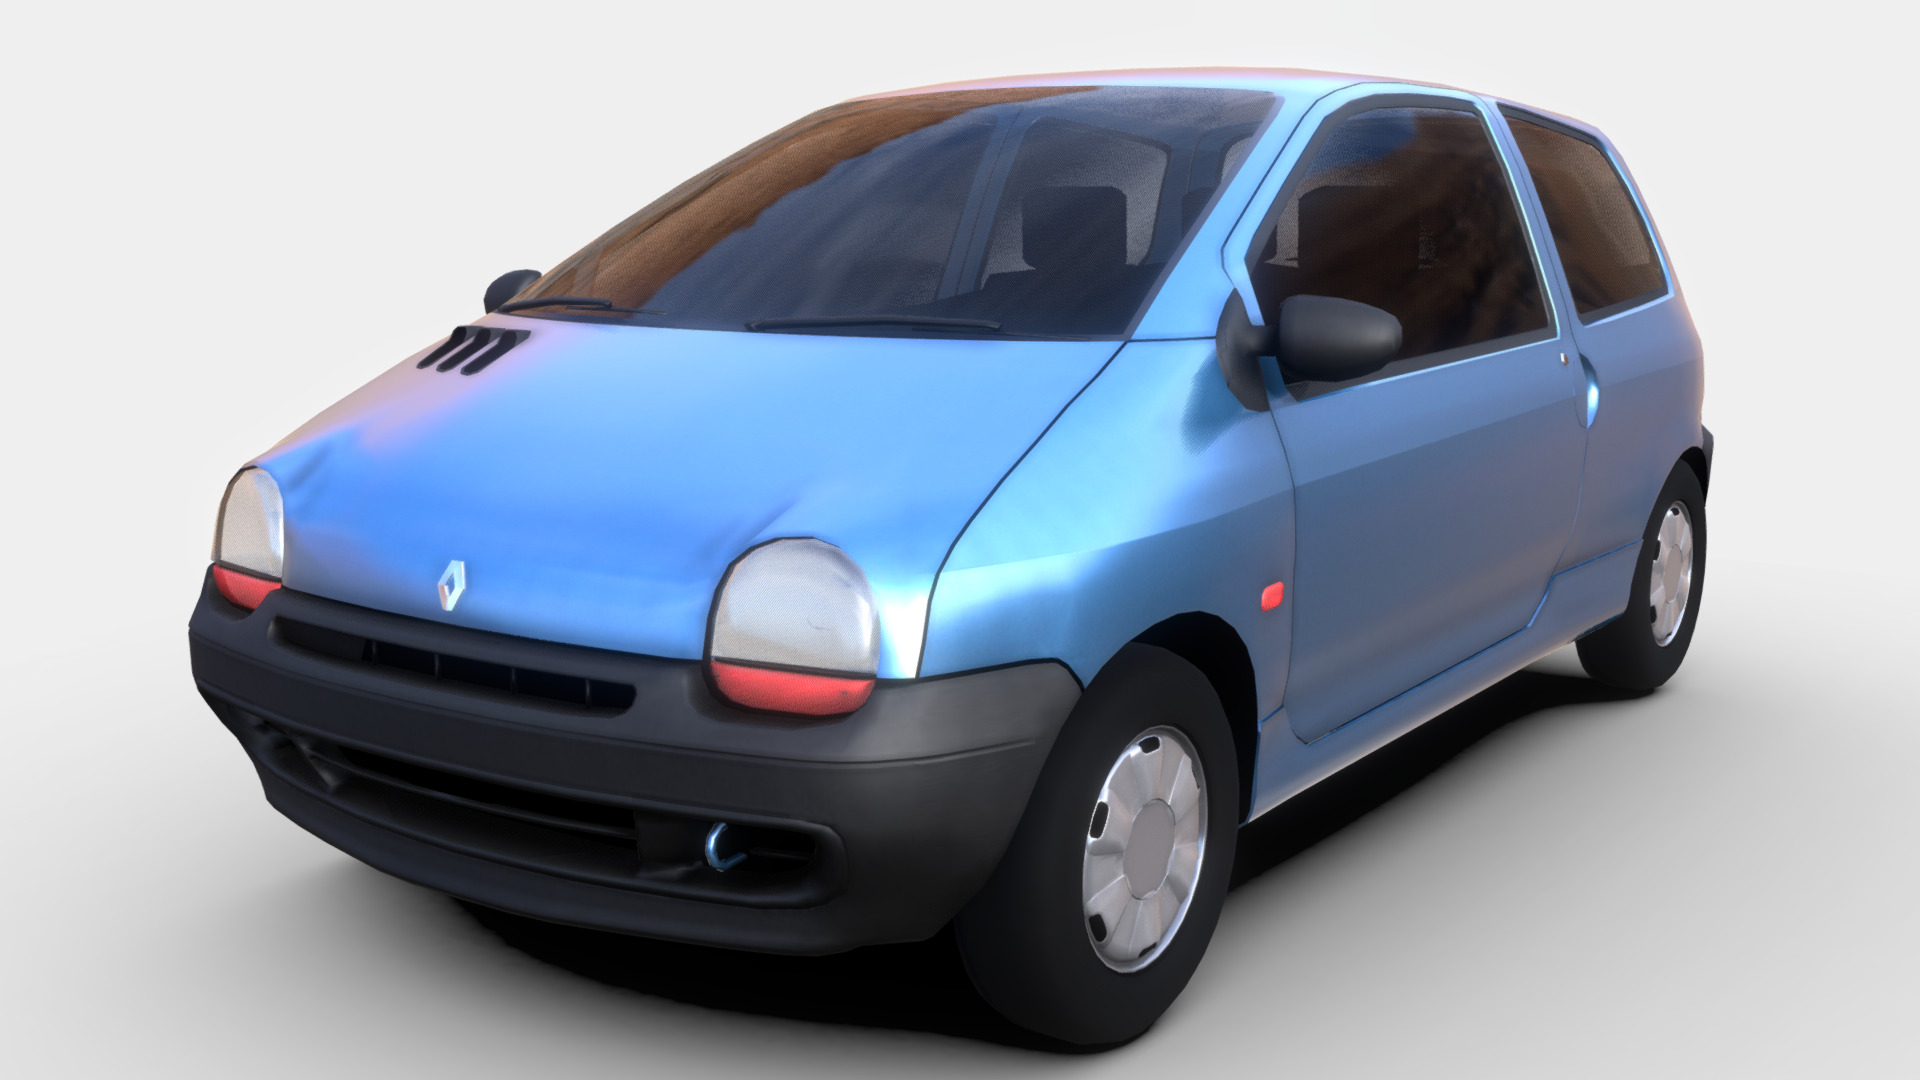 3D model Renault Twingo - This is a 3D model of the Renault Twingo. The 3D model is about a small blue car.